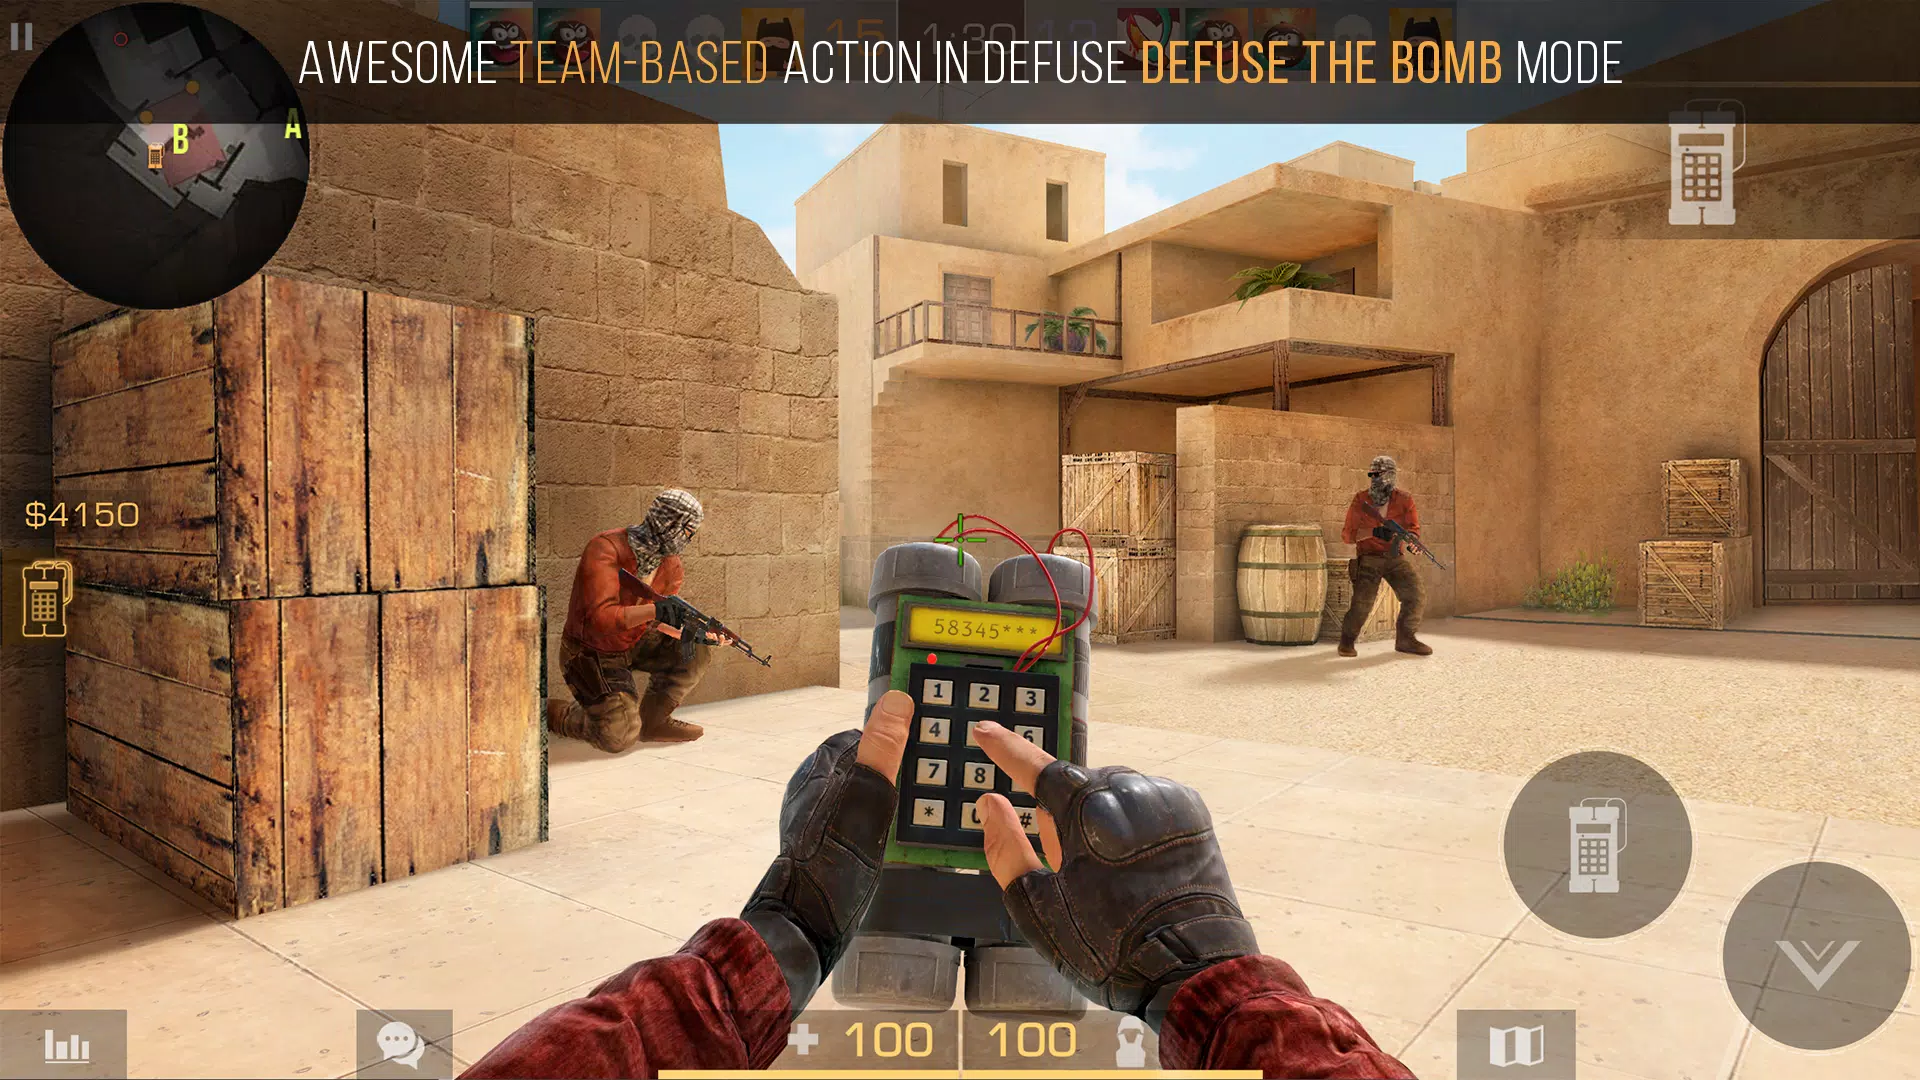 Standoff 2 for Android - APK Download